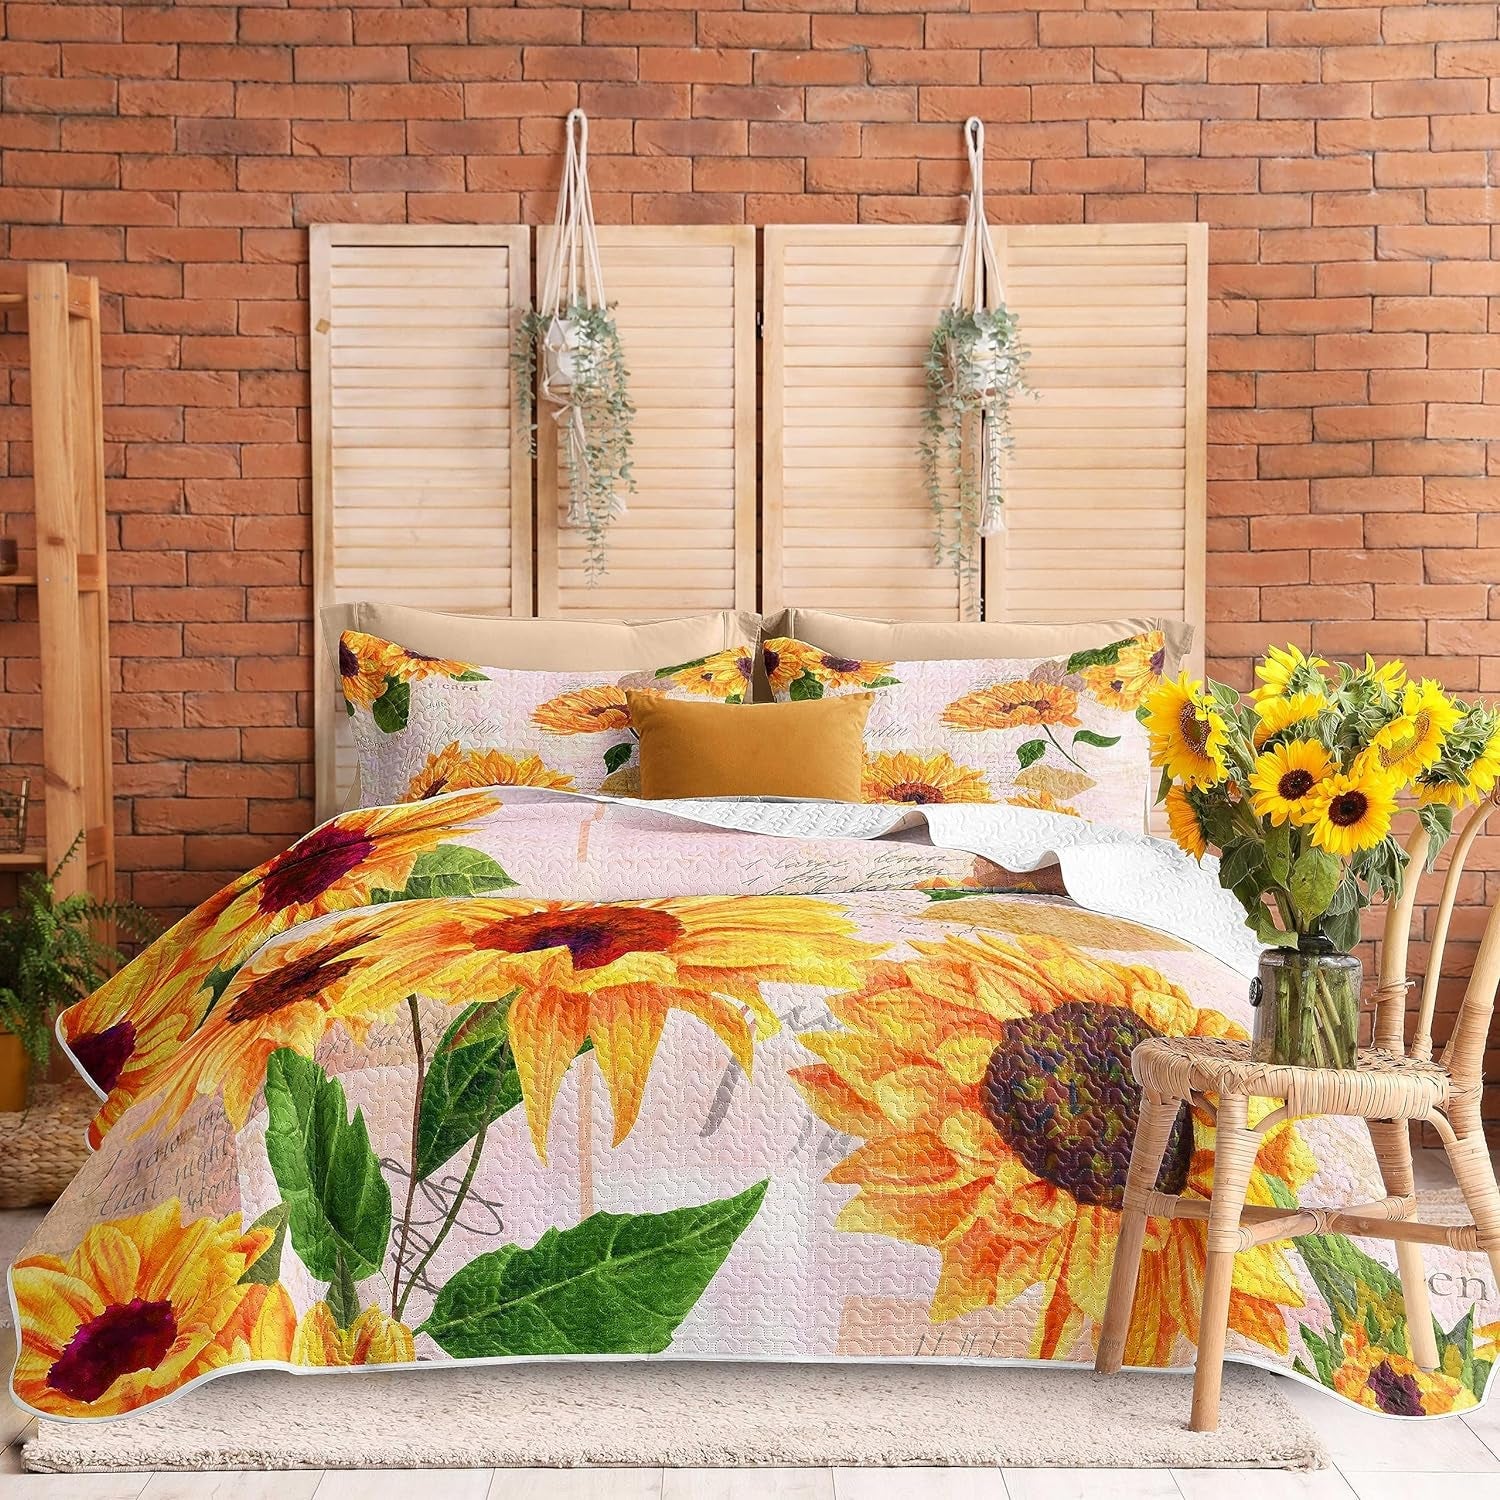 3 Piece Boho Floral Quilt Sets King Size Microfiber Quilts with 2 Shams Soft Lightweight Colorful Vibrant Bright Bohemian Bedding Bedspread Coverlet Comforter Set for All Season, 96''X106''